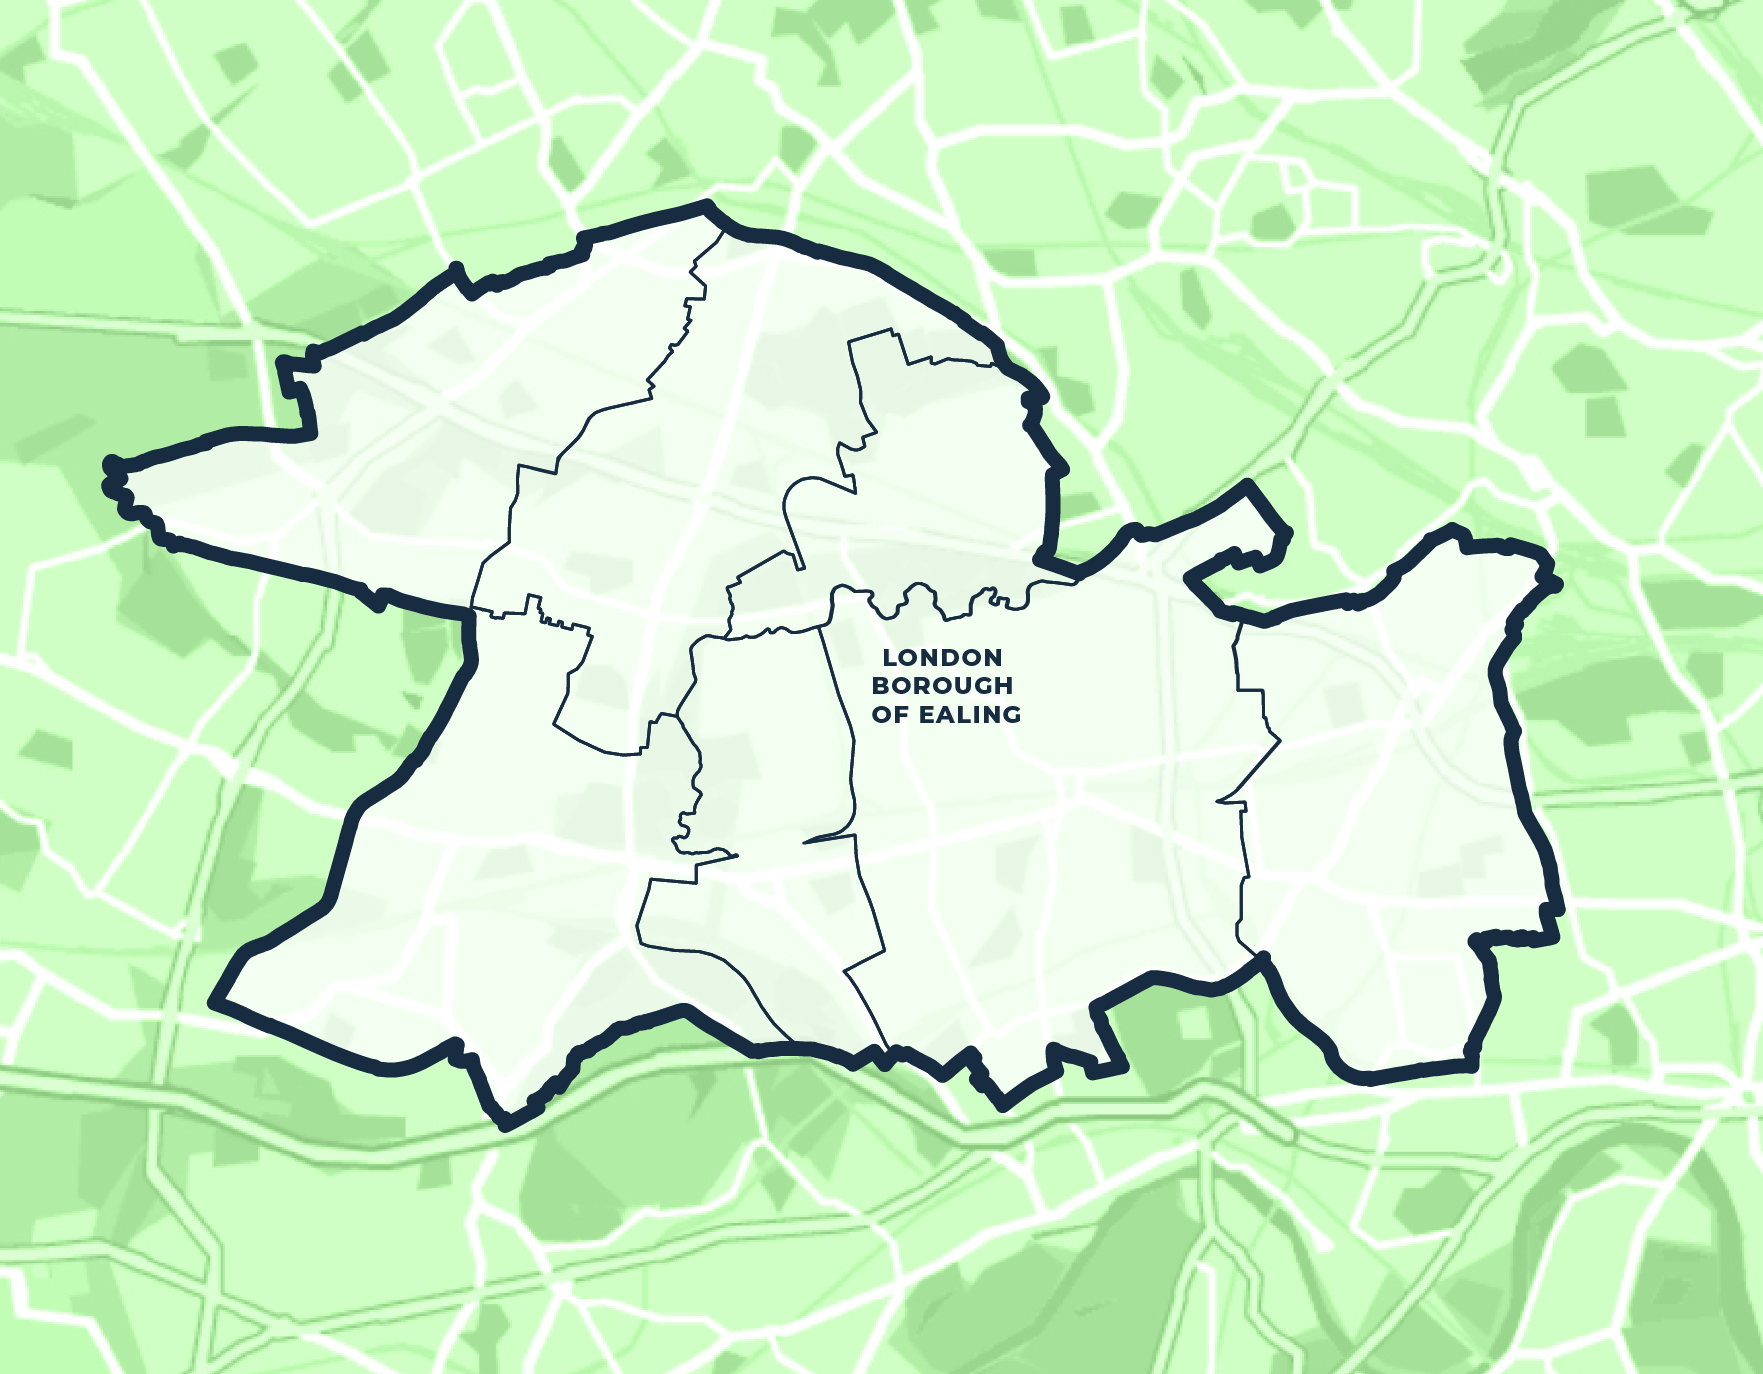 A map showing the location of london.